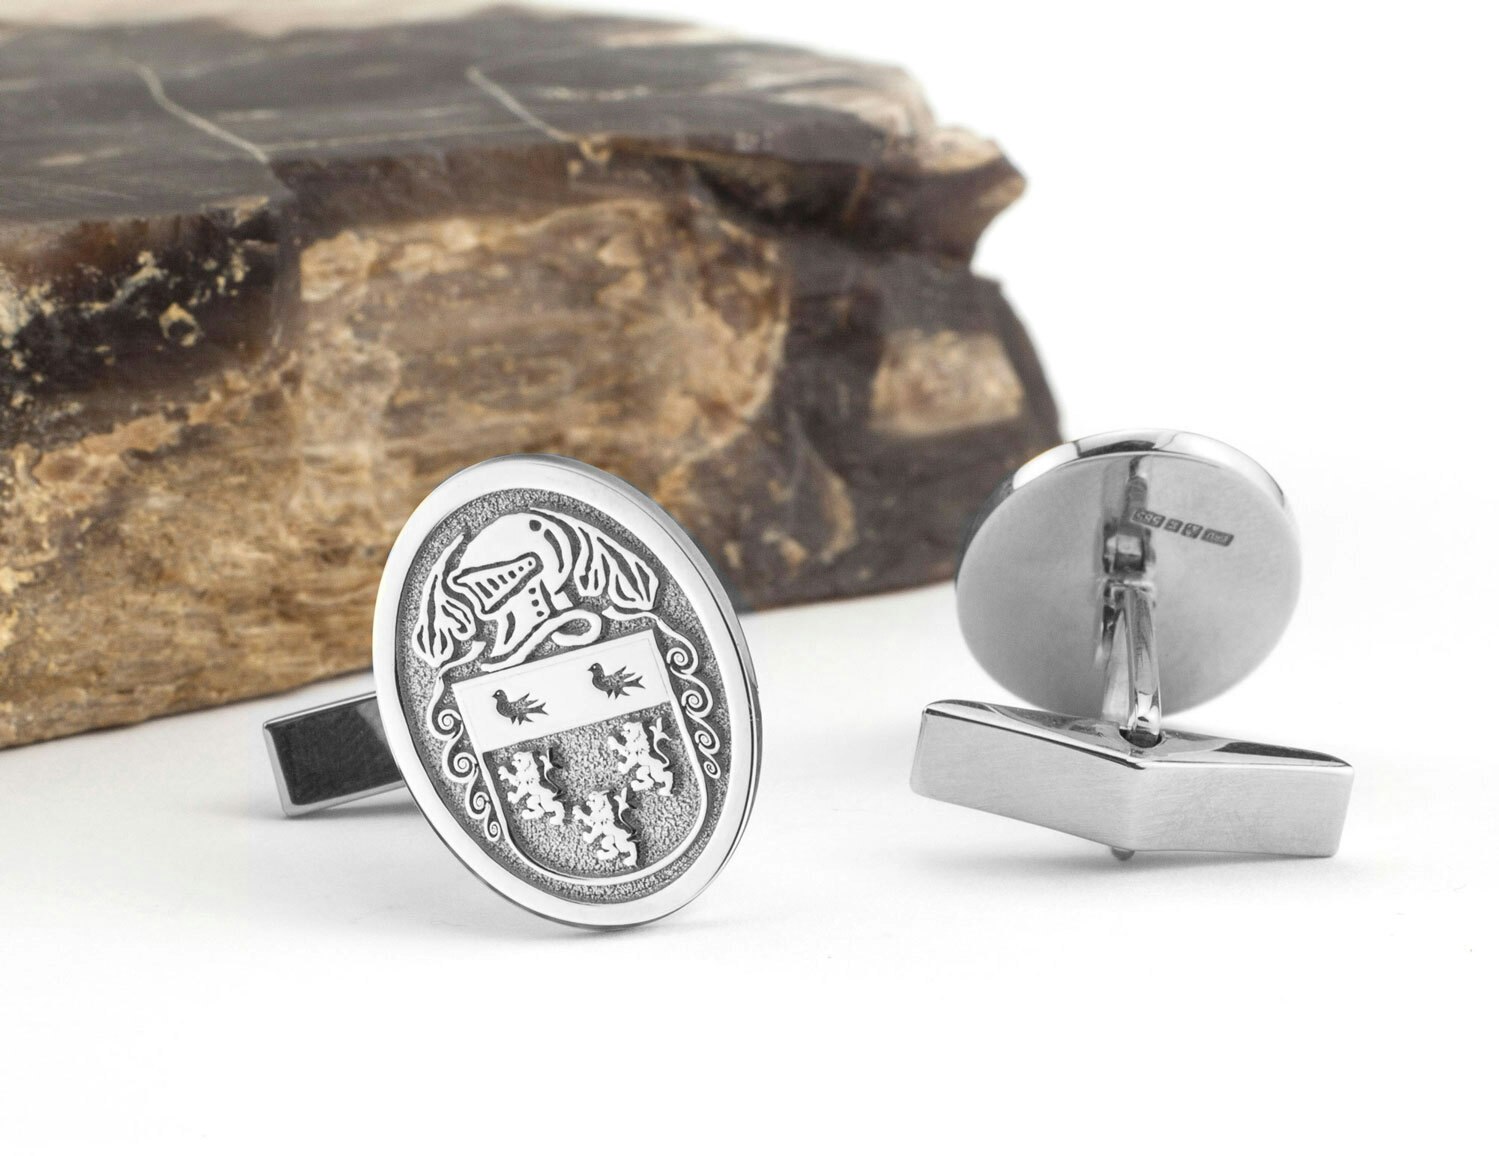 Select Gifts Dinkins England Heraldry Crest Sterling Silver Cufflinks Engraved Message Box 